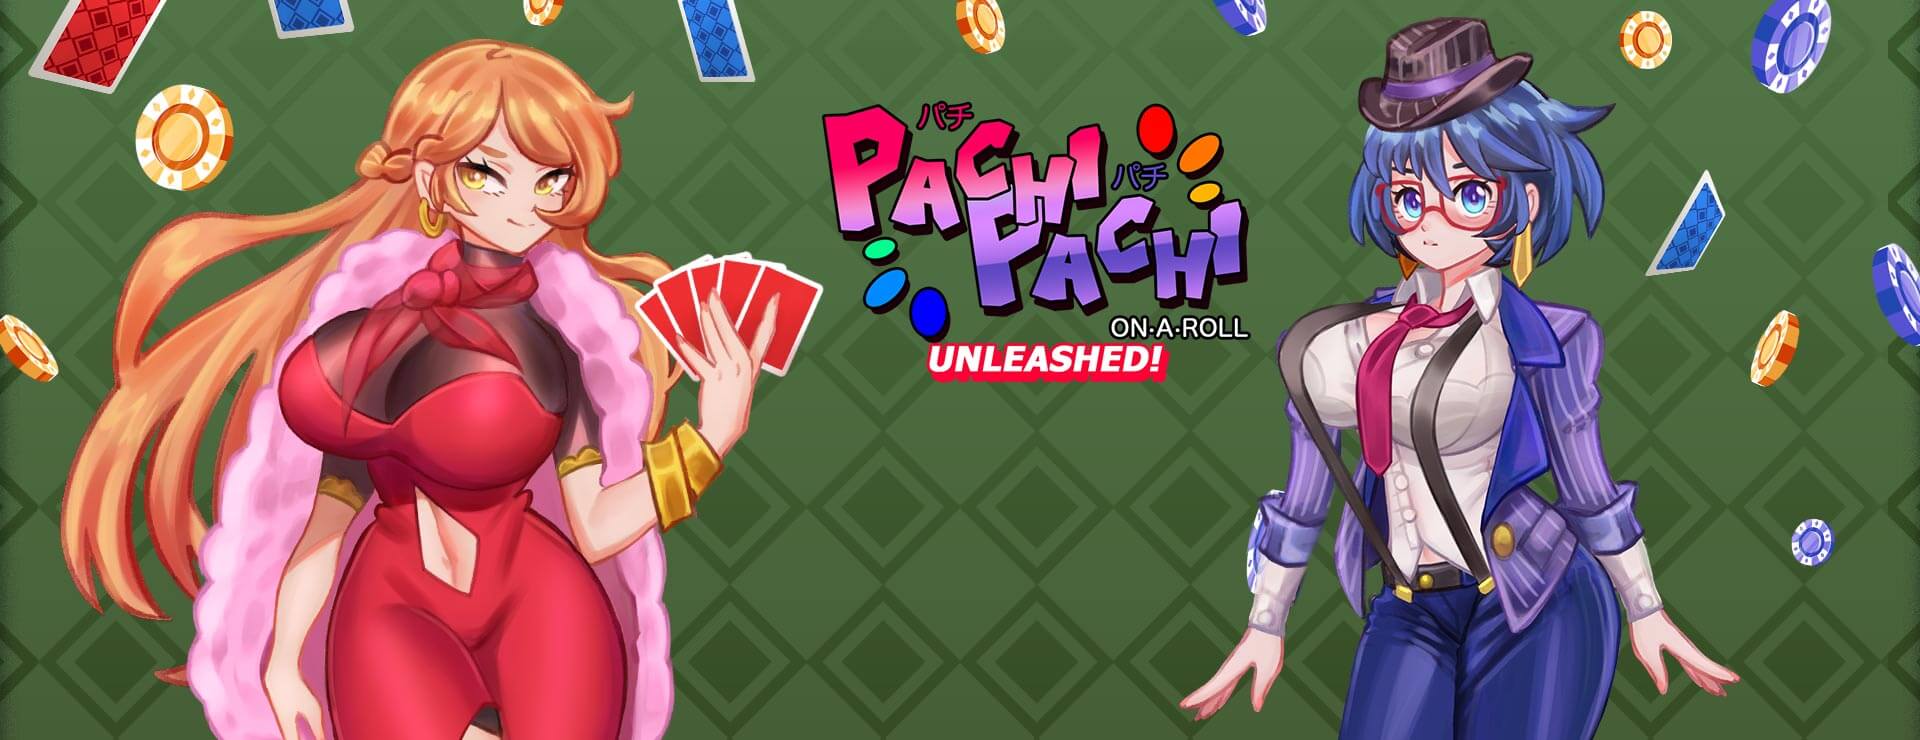 Pachi Pachi On A Roll Unleashed - Casual Juego